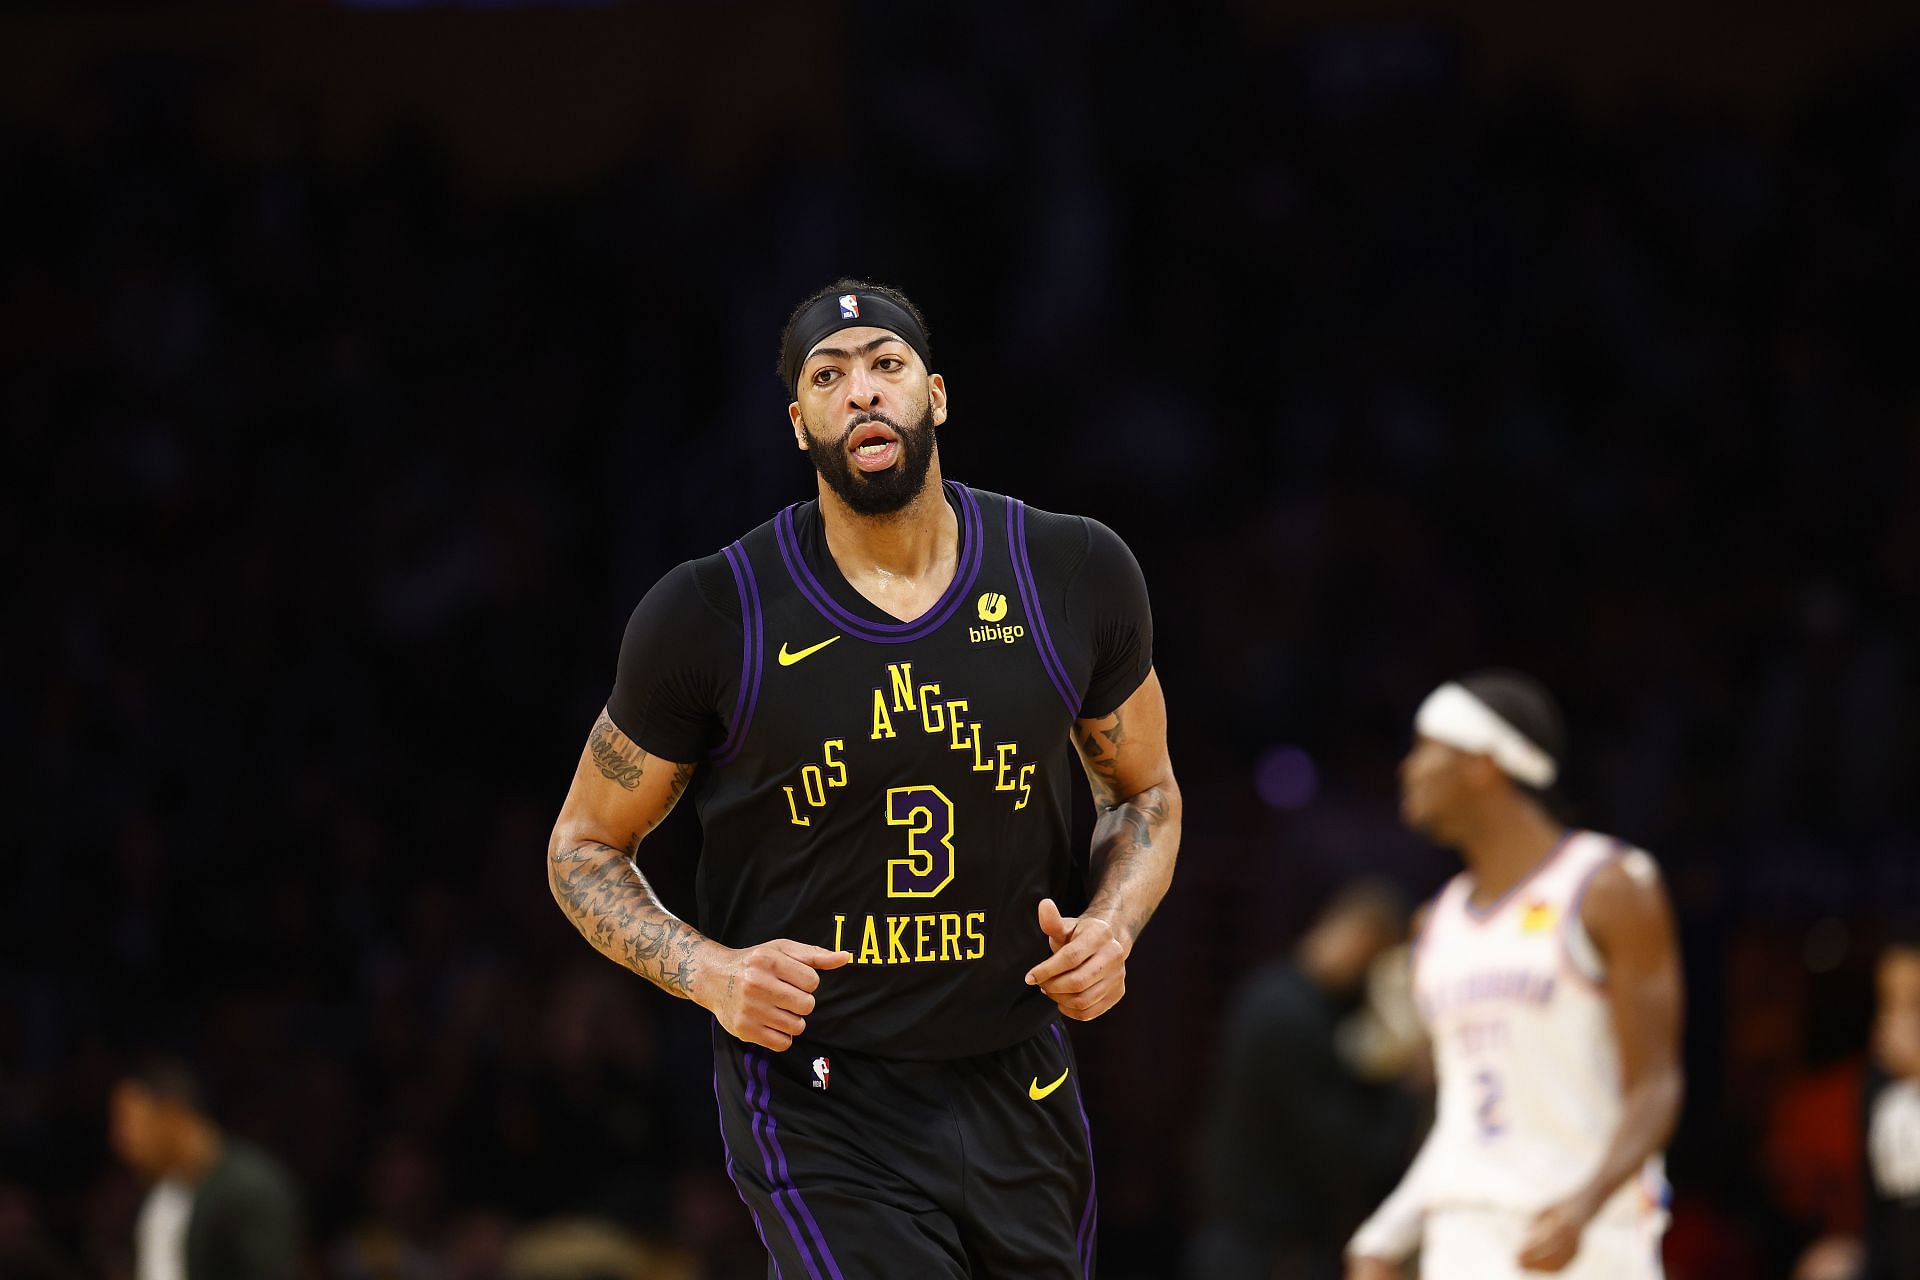 Anthony Davis has played 41 out of the 43 games for the LA Lakers this season.